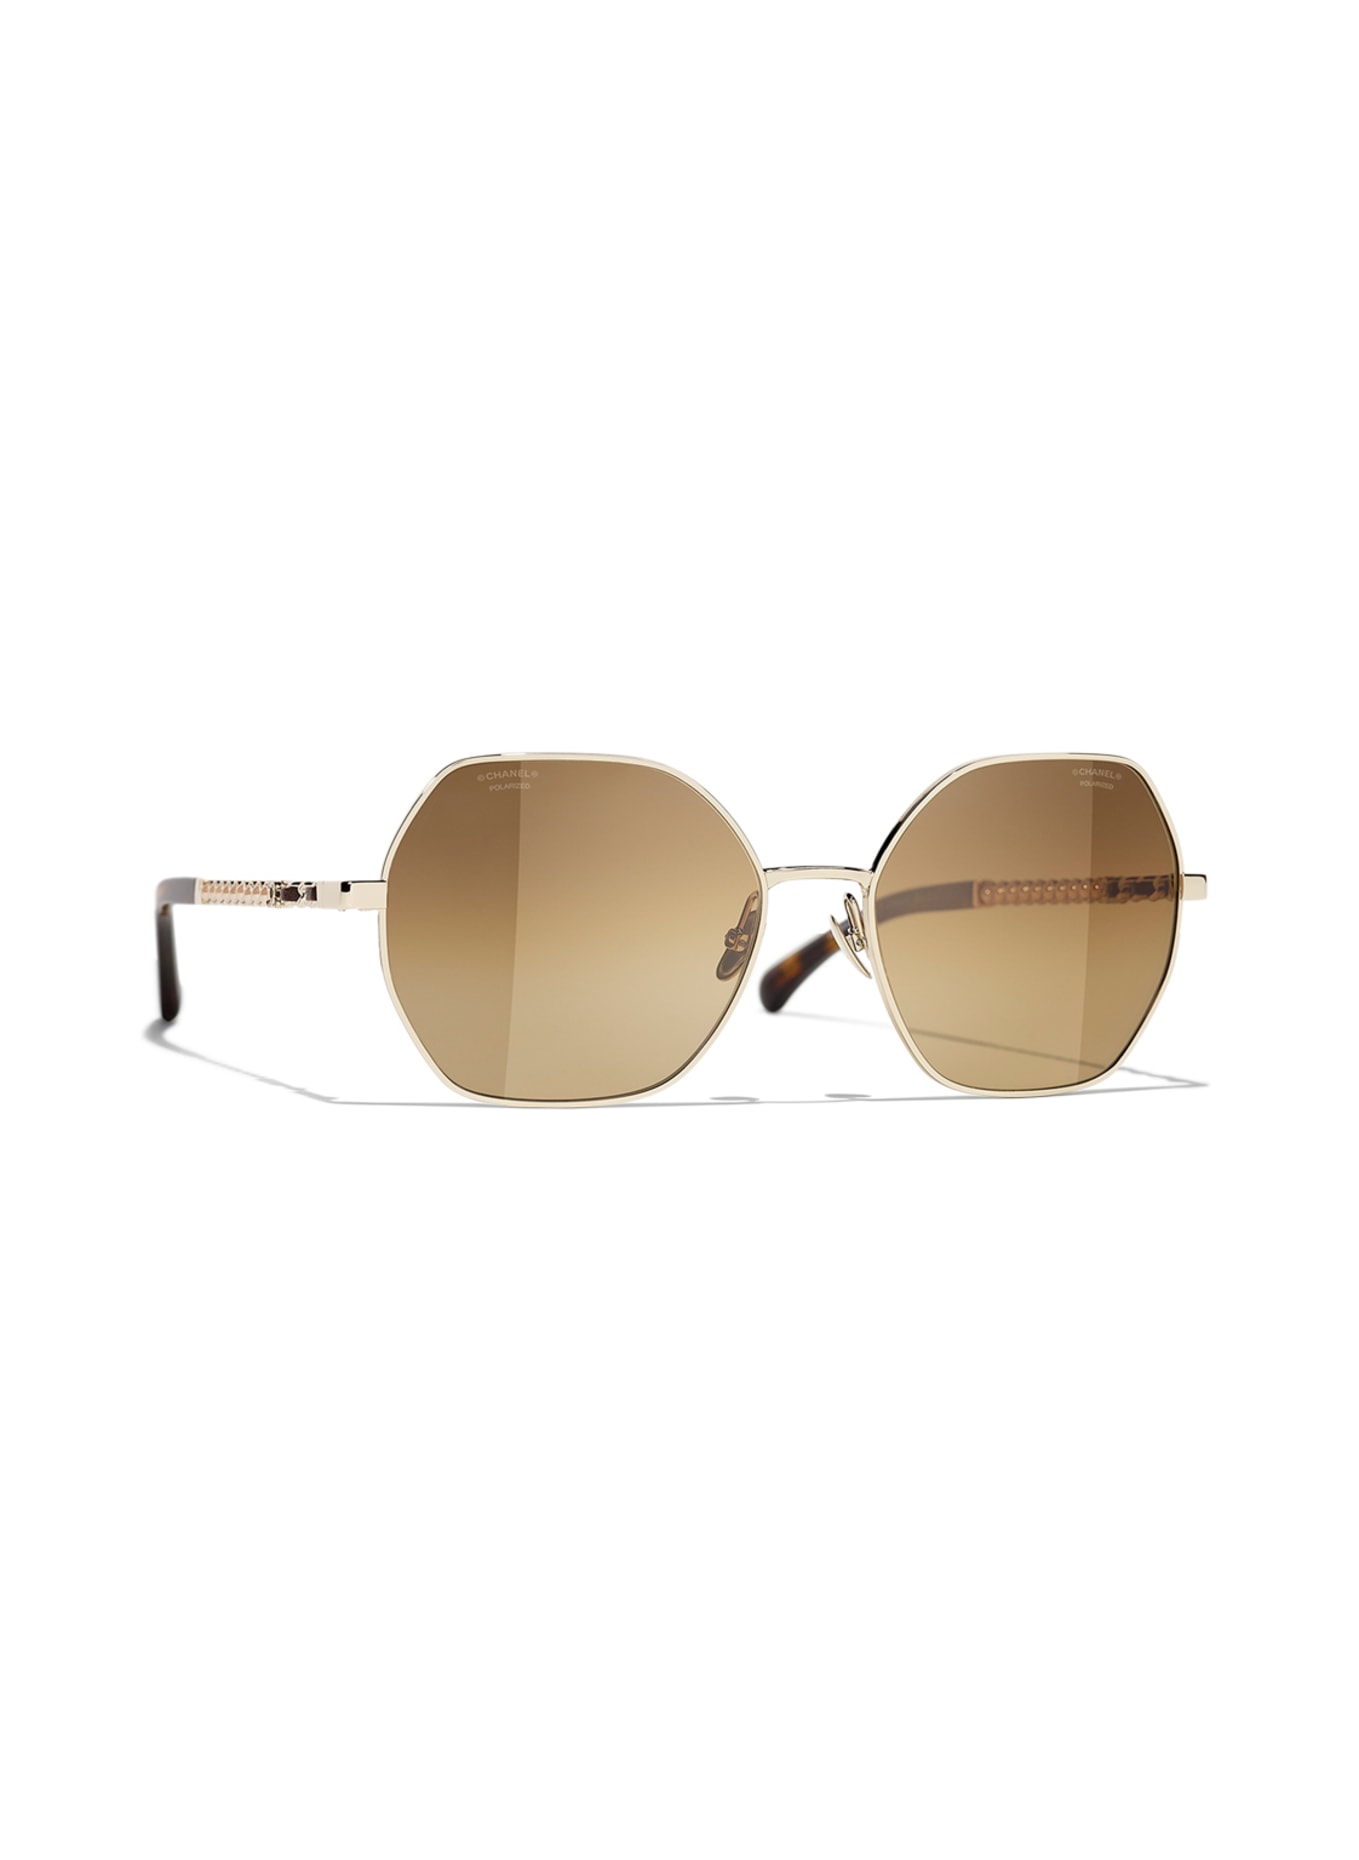 CHANEL Polygonal sunglasses in c422m2 - gold/ brown polarized